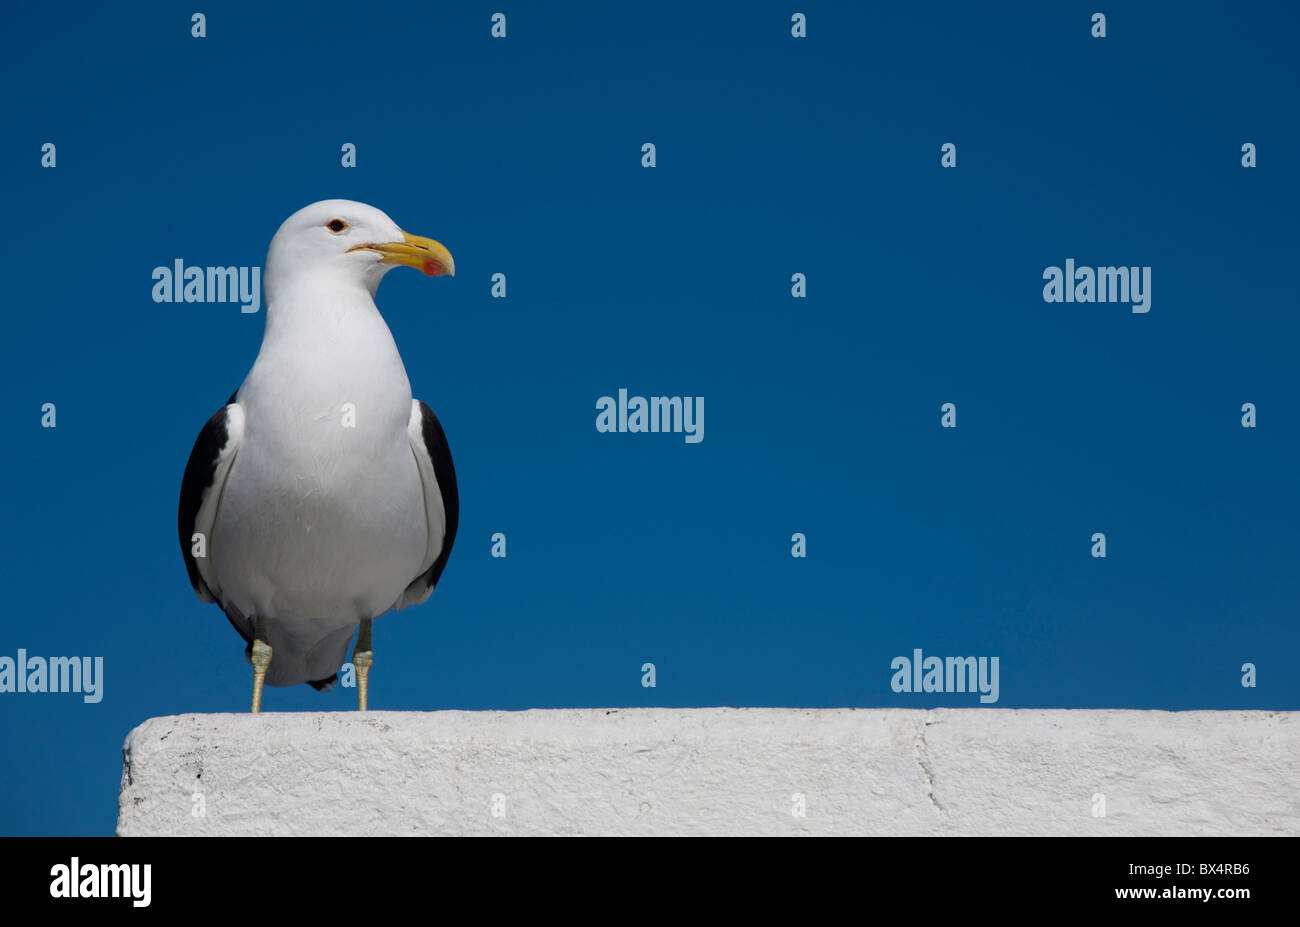 Seagull on a wall. Stock Photo